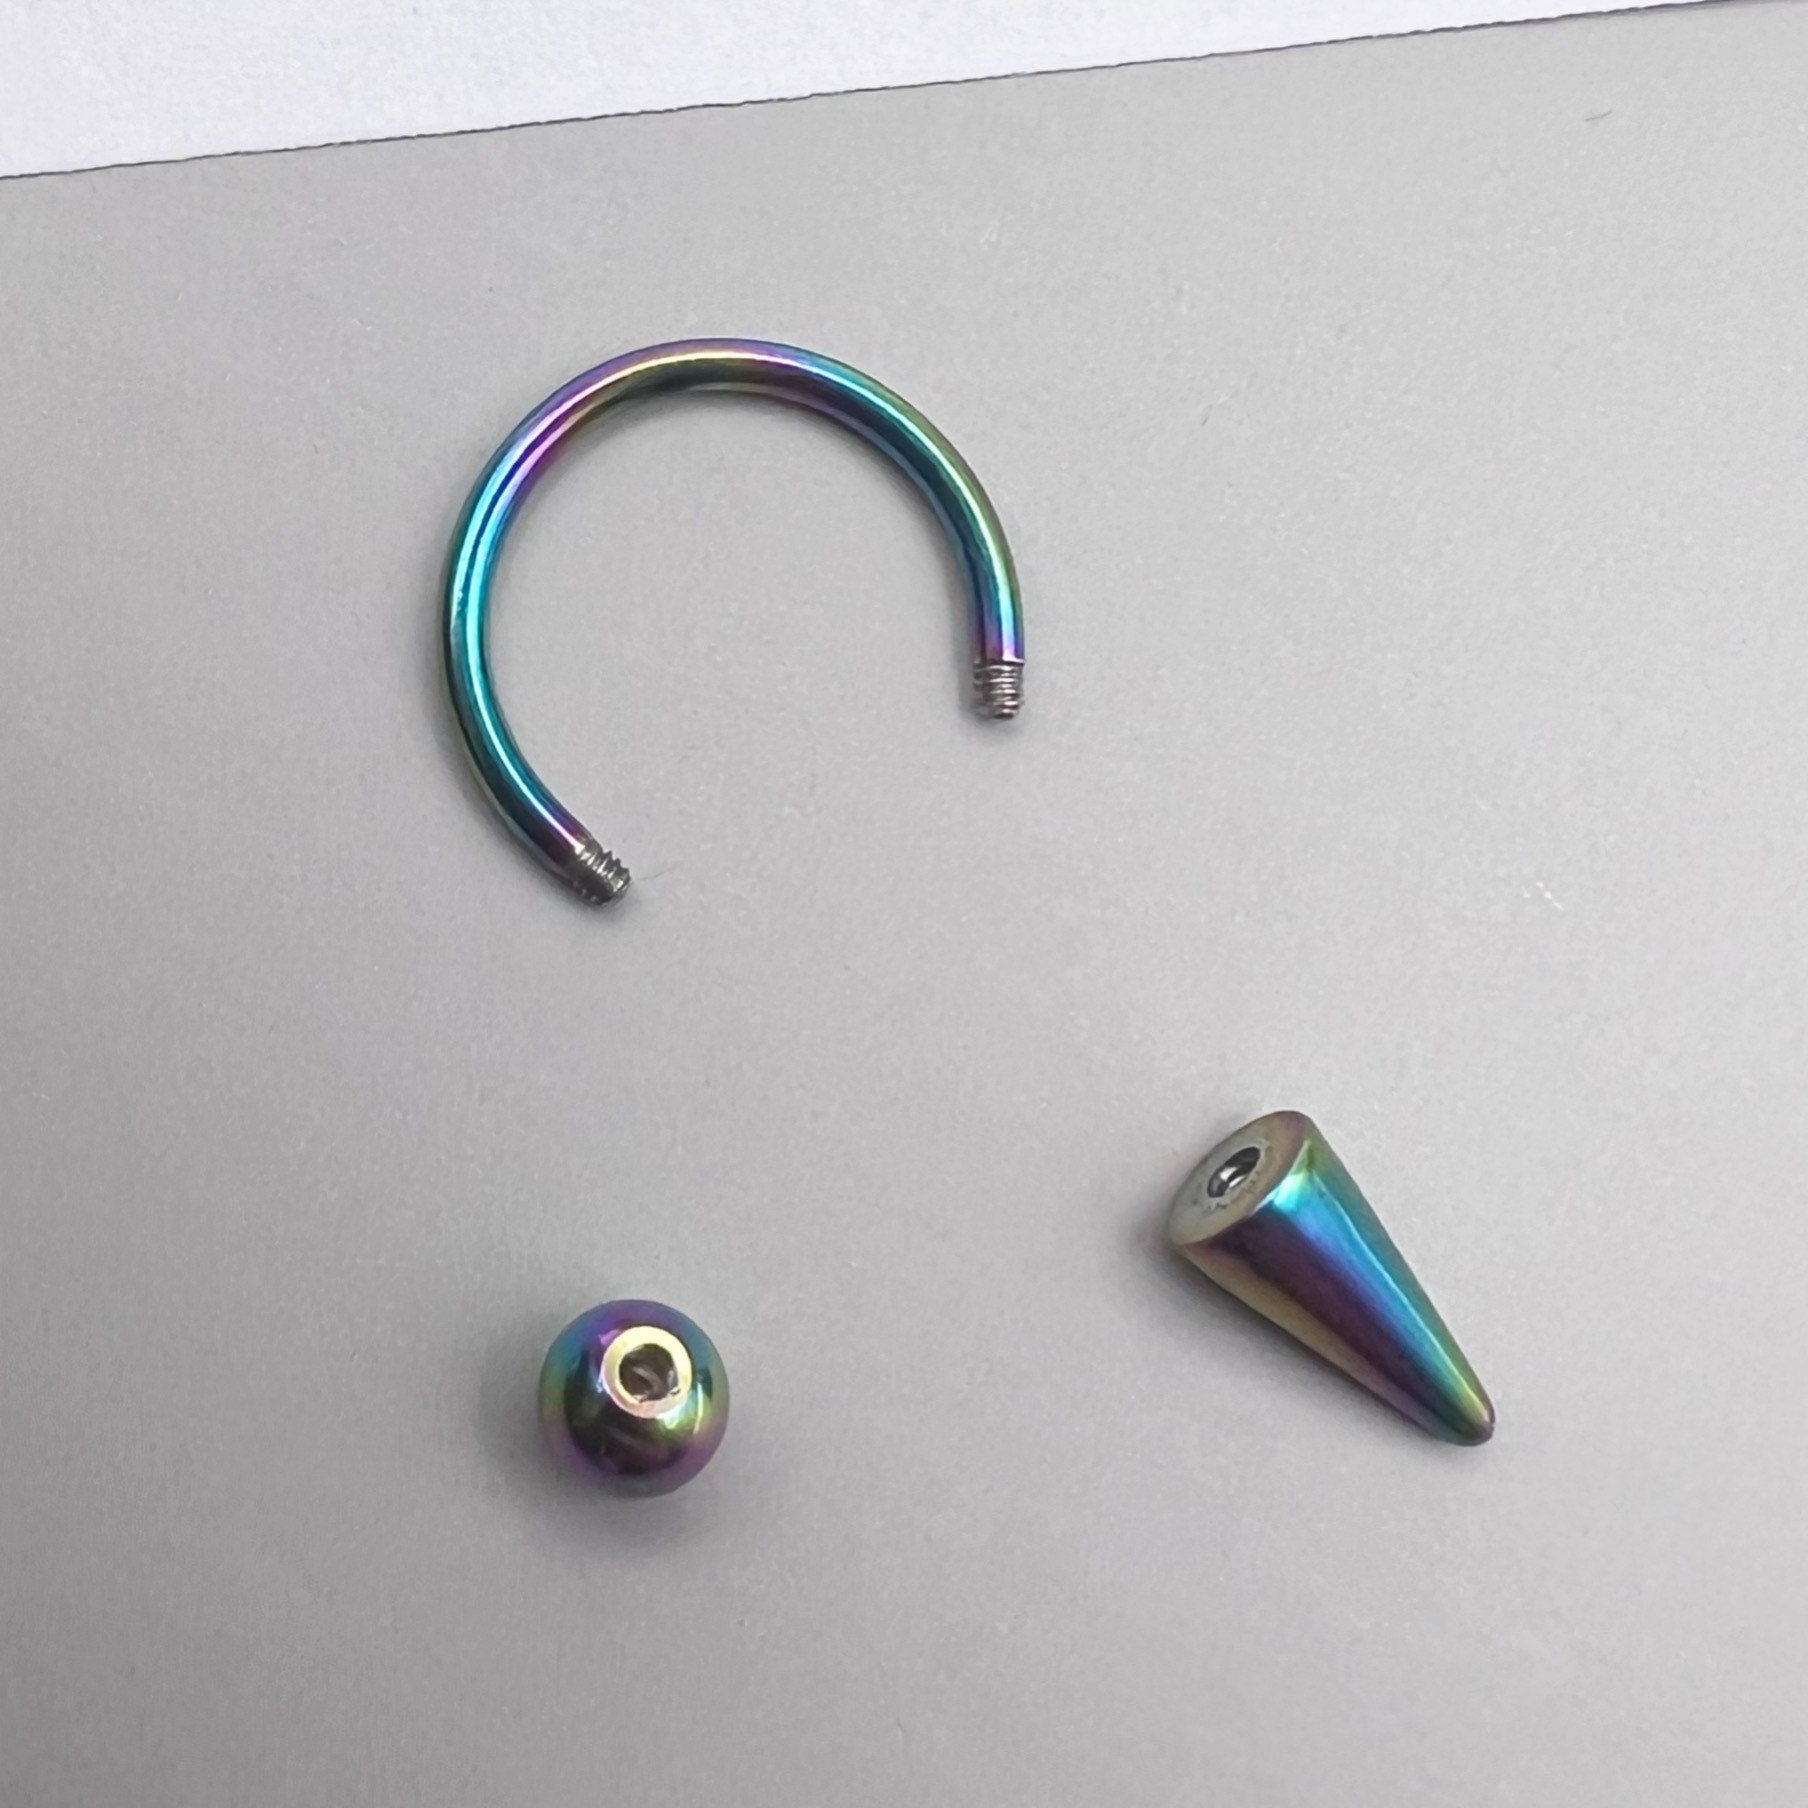 PINKSEE 10Pcs 316L Surgical Stainless Steel Circular Barbells Horseshoe 18g Lip  Ring Eyebrow Nose Studs Body Piercing Jewelry - Price history & Review |  AliExpress Seller - Shop107508 Store | Alitools.io